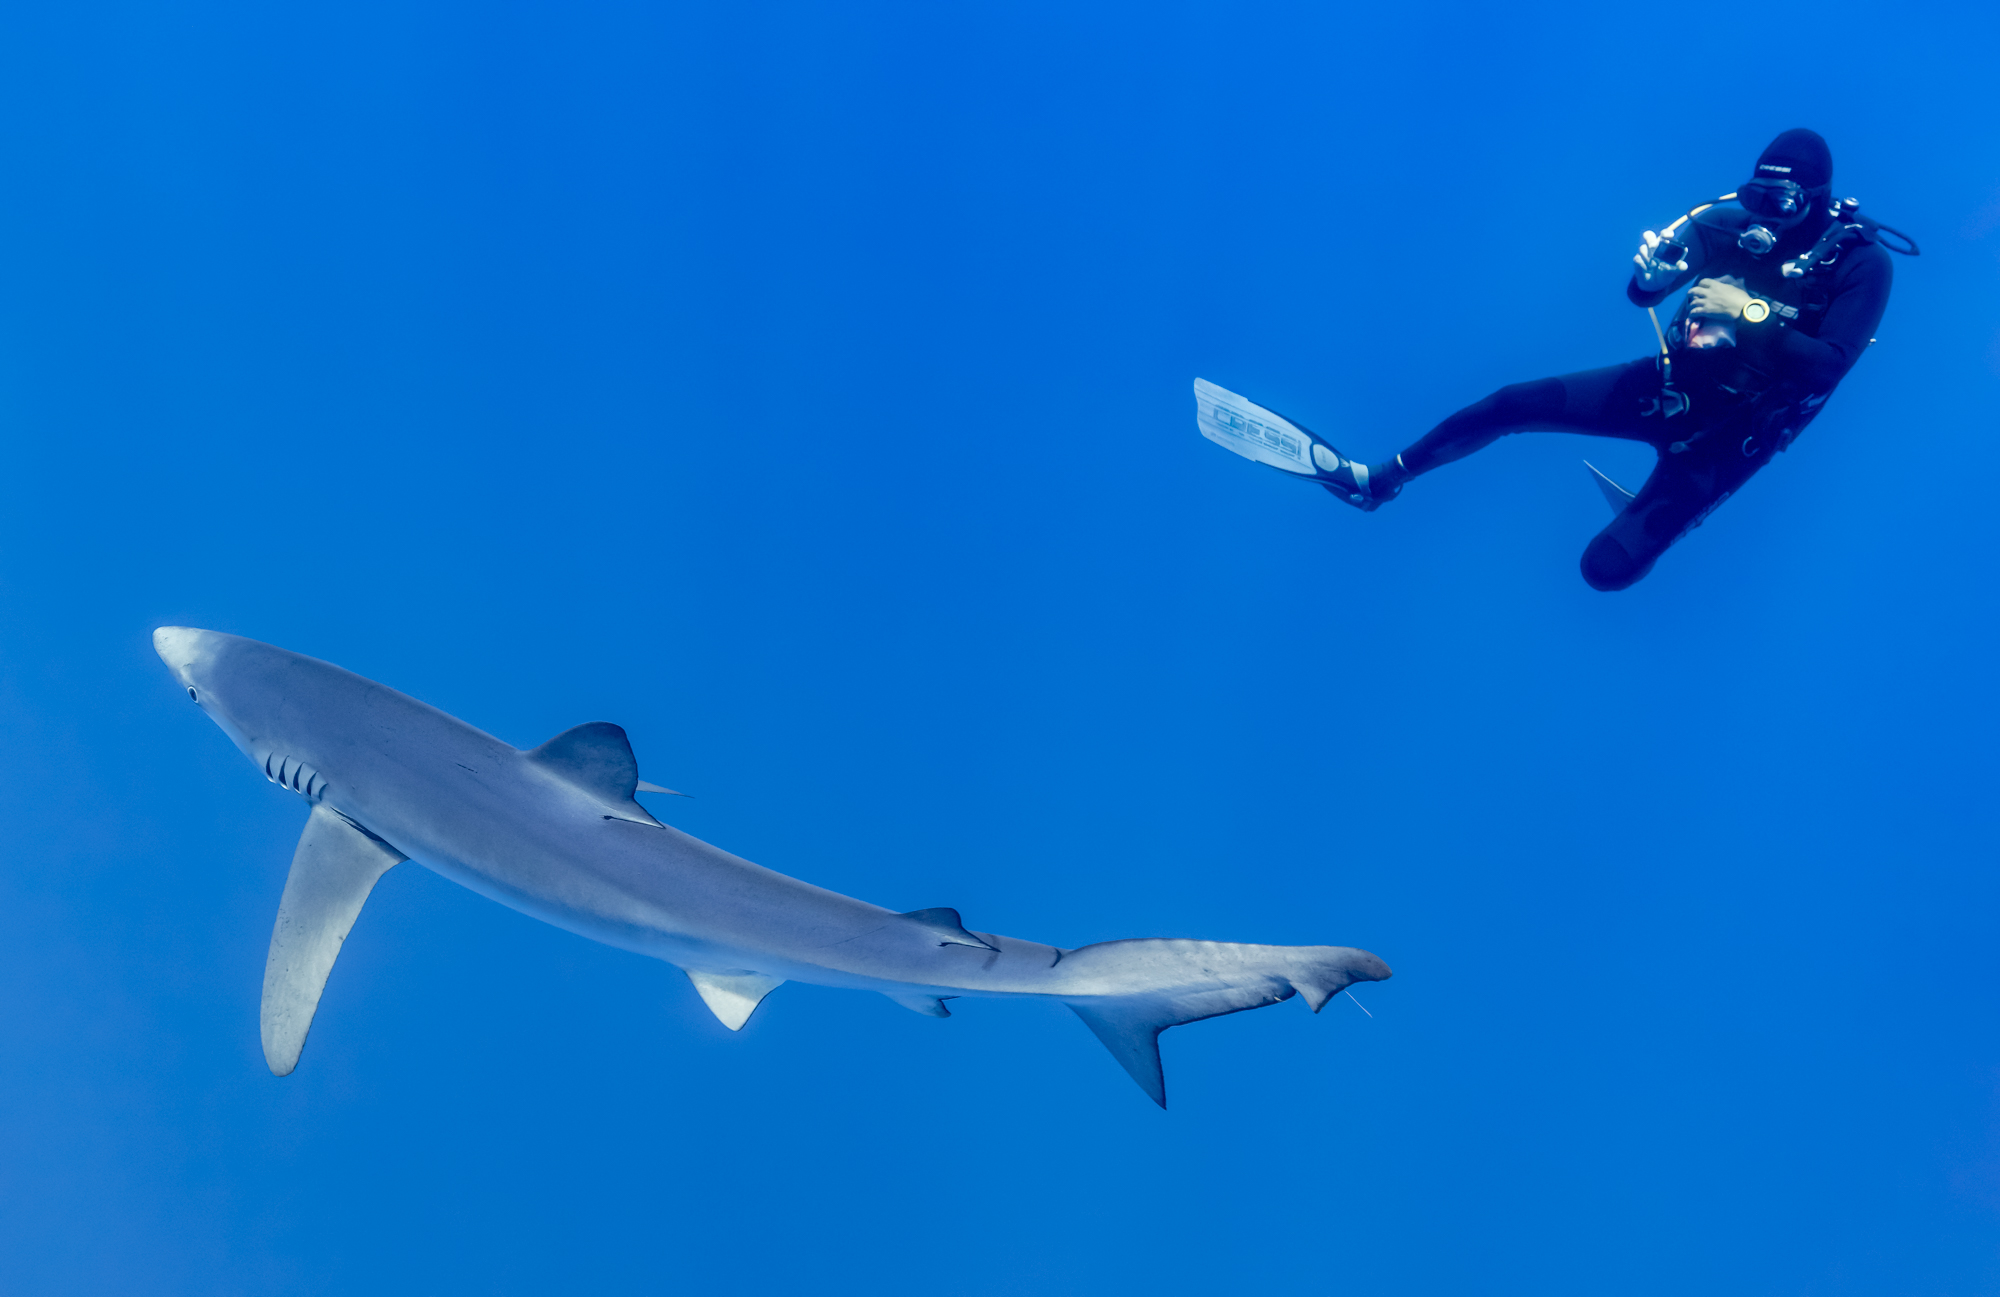 Blue shark (Prionace glauca) being photographed by a fellow diver between the islands of Pico and Faial, Azores, Portugal. The blue shark is a species of en:requiem shark, in the family Carcharhinidae, that inhabits deep waters (images taken though between 5 and 10 meter below water) averaging around 3.1 m (10 ft) and preferring cooler waters. They can live up to 20 years, can move very quickly and feed primarily on small fish and squid, although they can take larger prey.